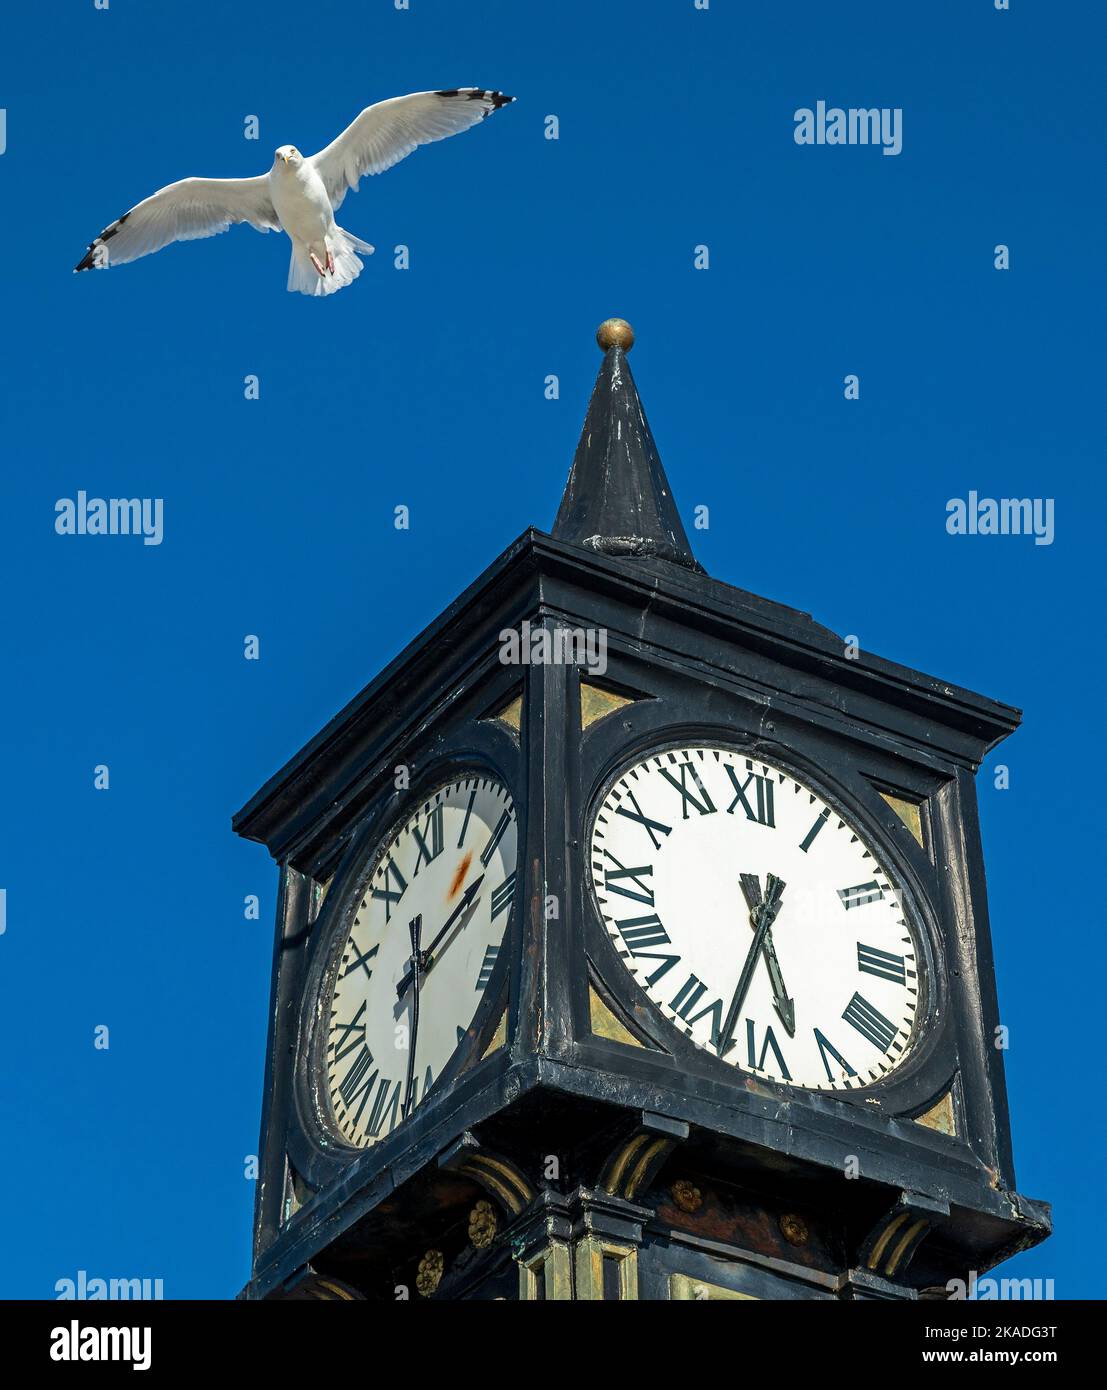 Seagull (Laridae) in flight, clock tower, Palace Pier, Brighton, East Sussex, England, Great Britain Stock Photo